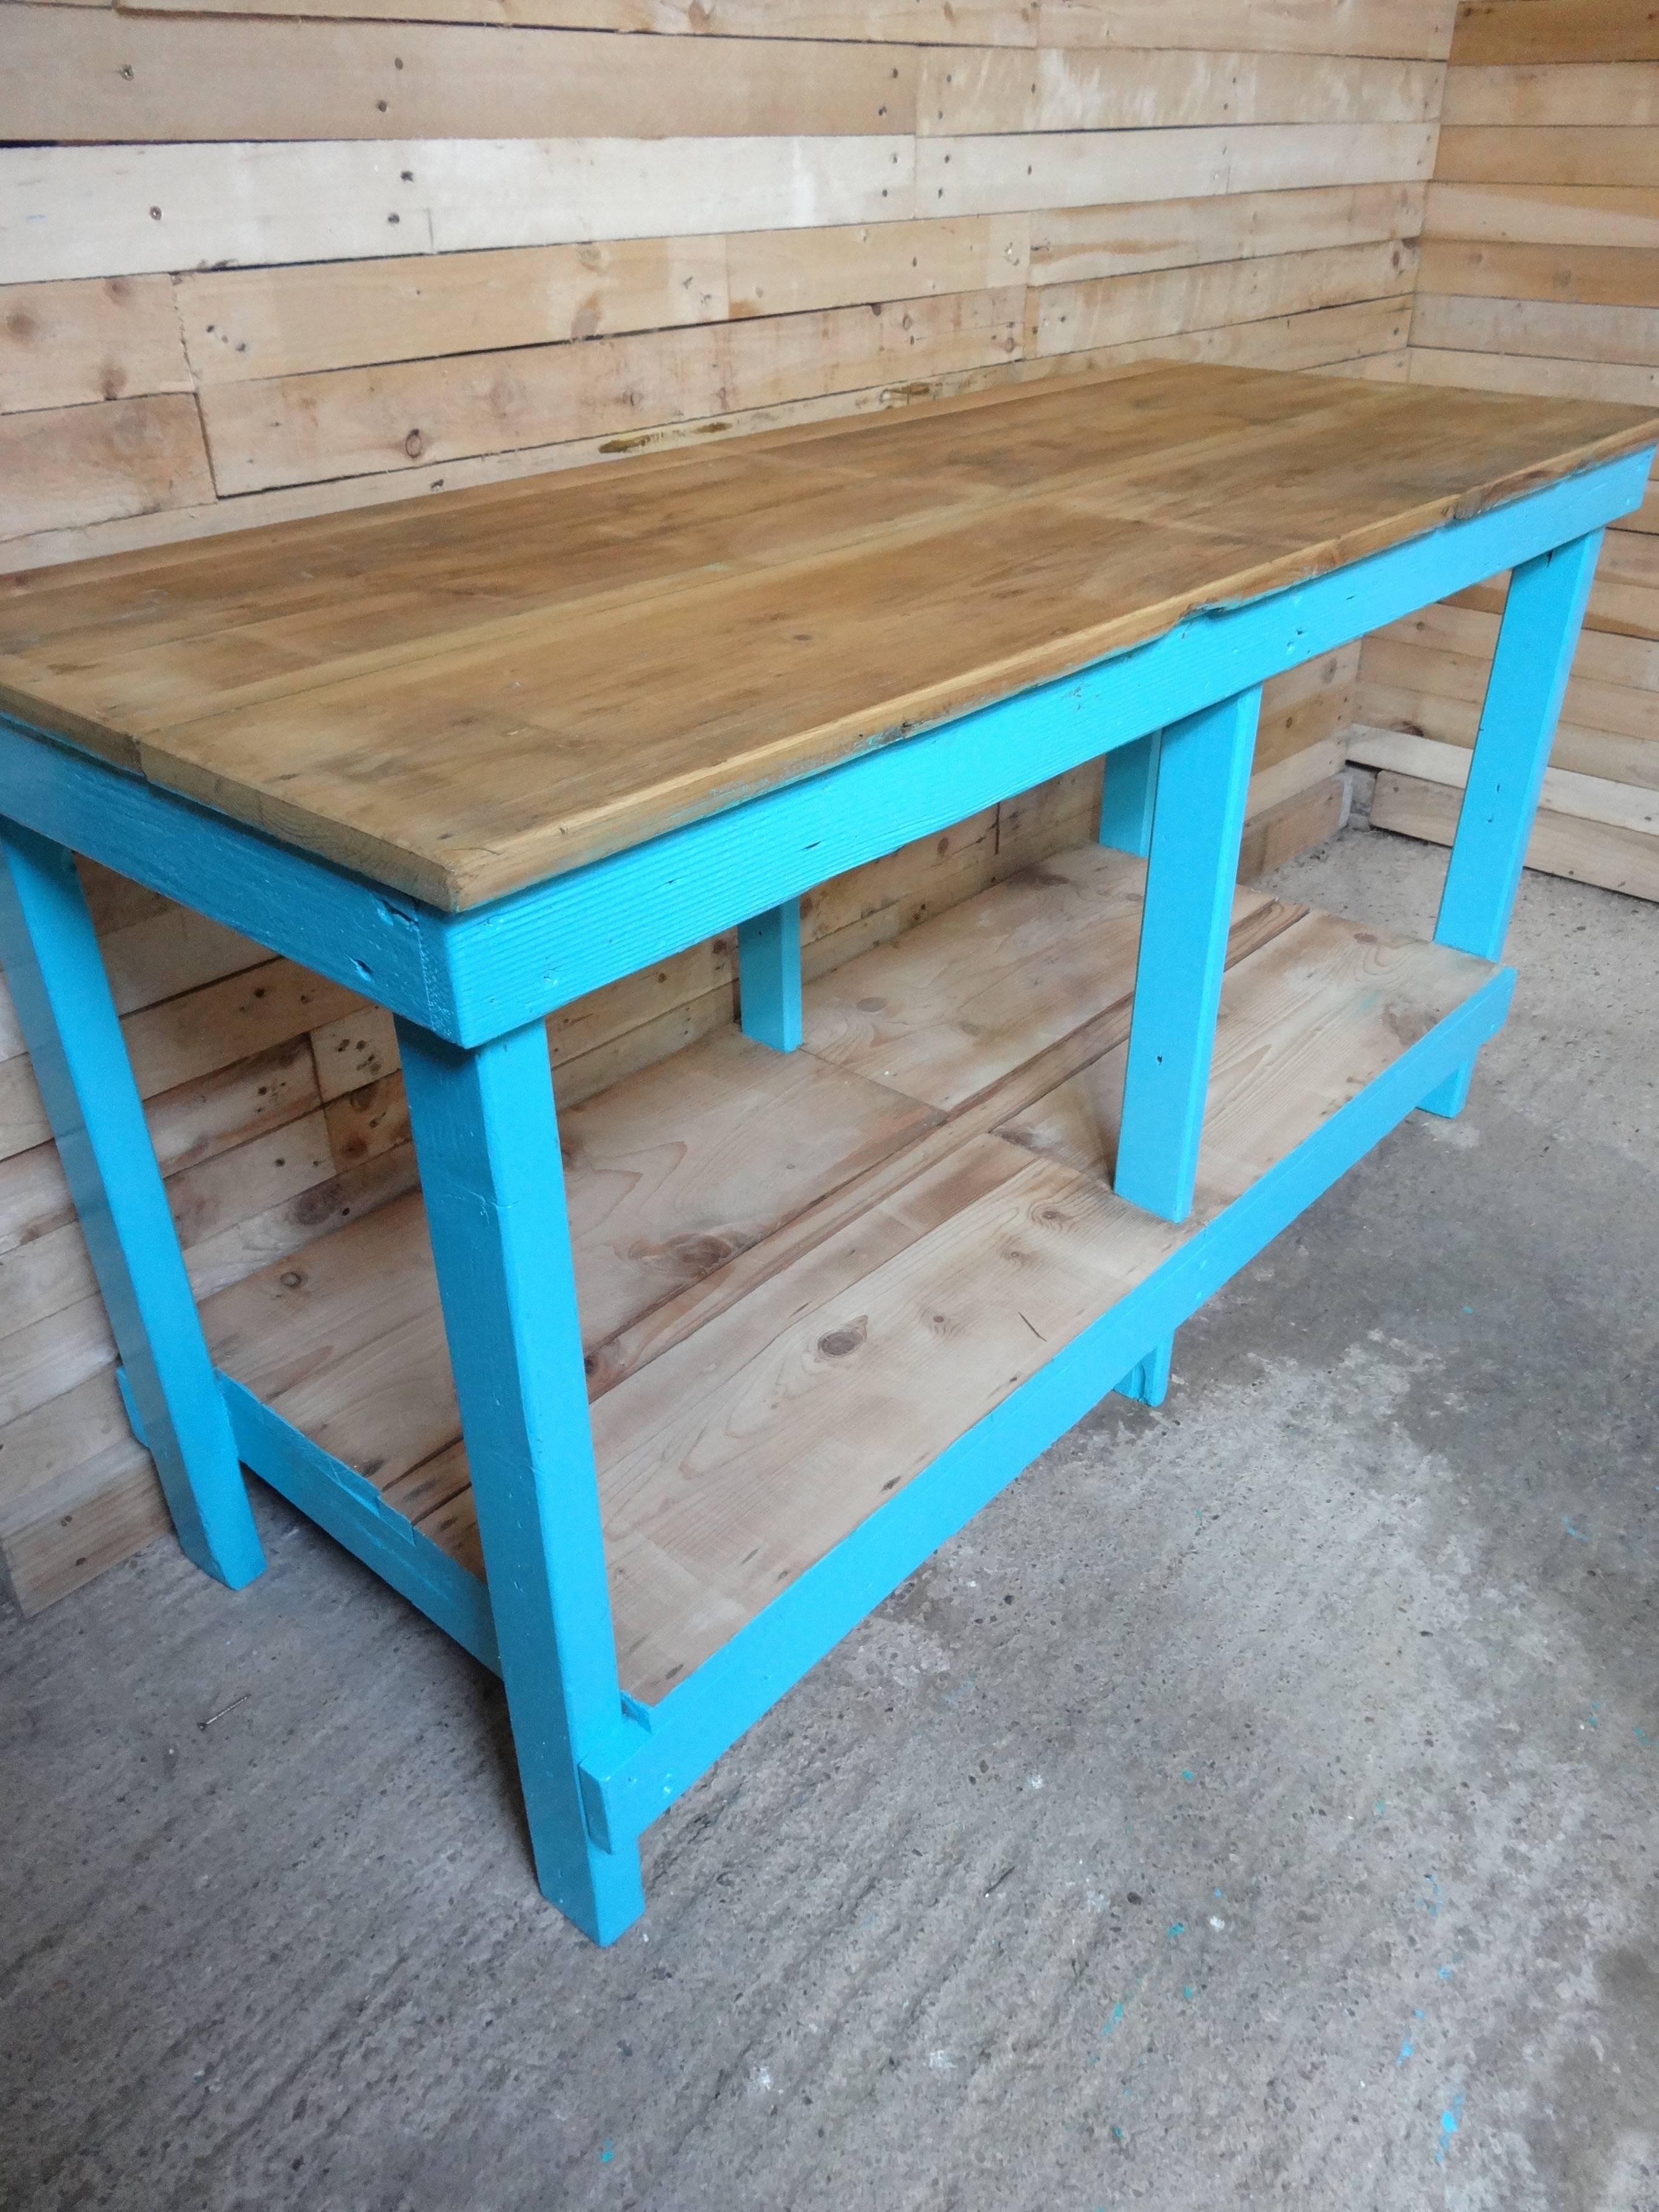 Industrial fabric cutting table we bought this out of the Windsor of Woollies knitwear mill, they made fabrics for the European royal families. This table would be ideal for a shop fitout to display goods, we have two more blue tables available,